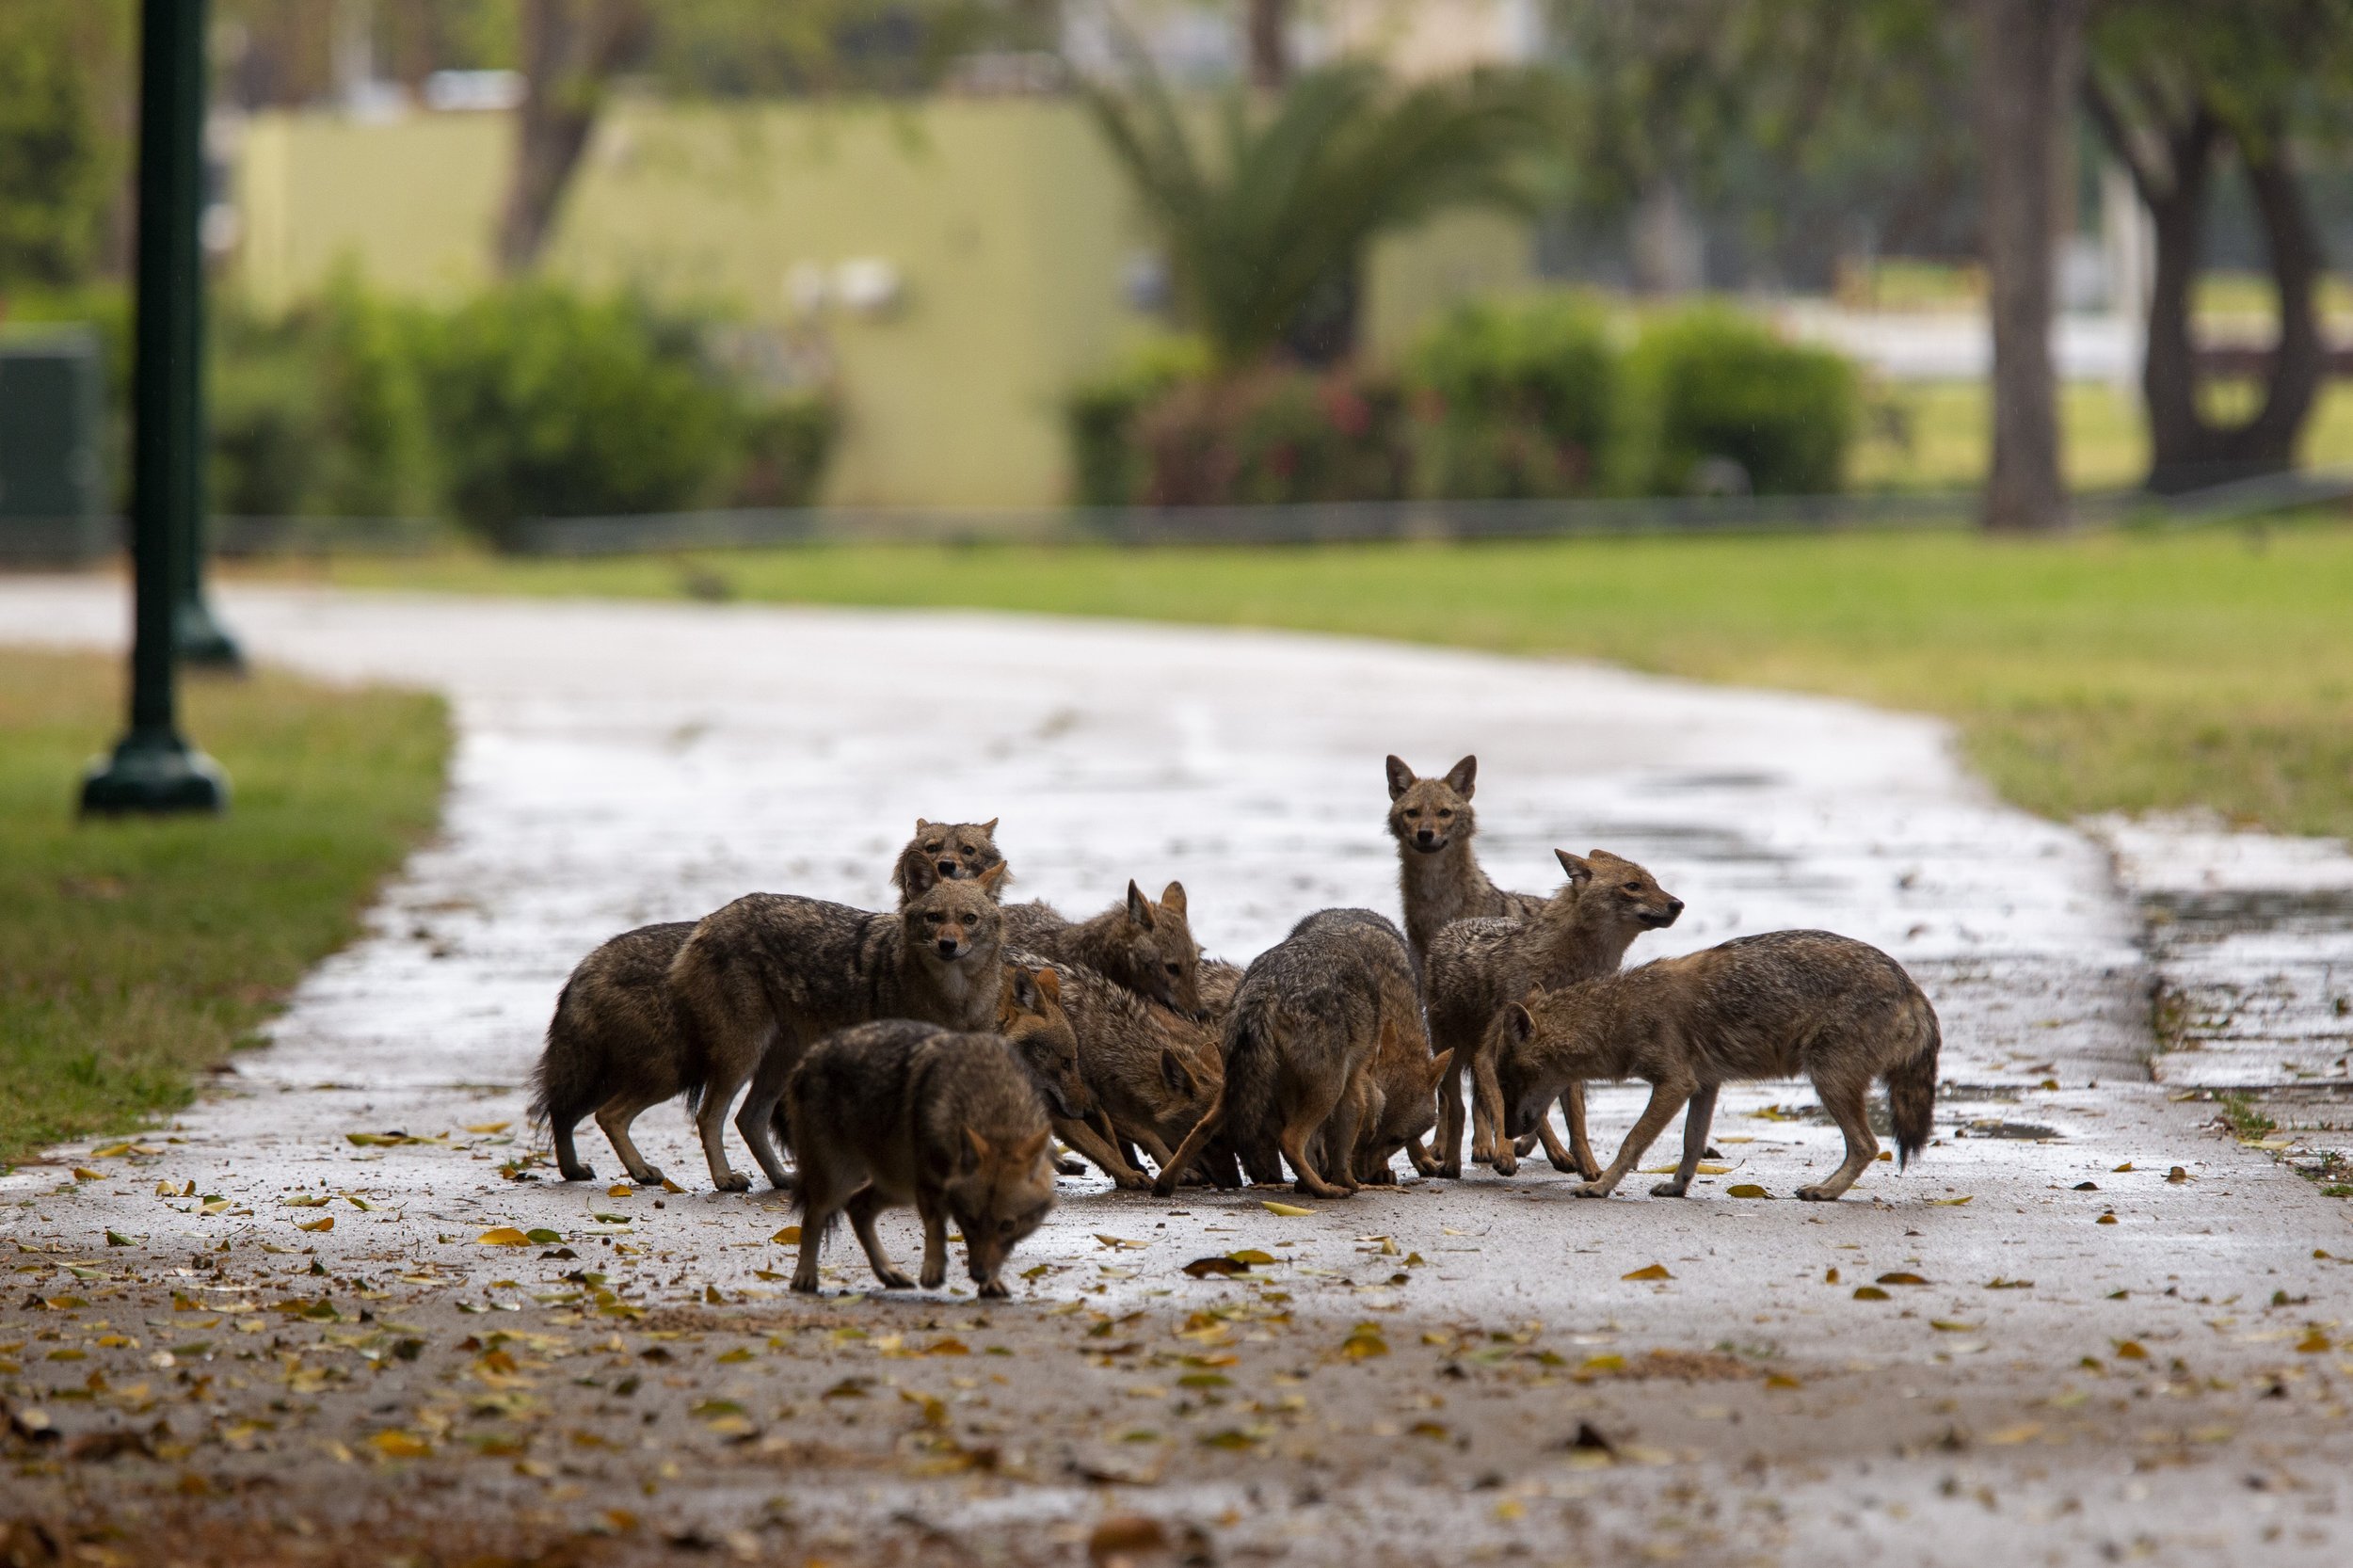  Jackals eat dog food that was left for them by an Israeli woman at Hayarkon Park in Tel Aviv, Israel on April 10, 202. When Tel Aviv was in lockdown due to the coronavirus pandemic, it cleared the way for packs of jackals to take over this urban oas